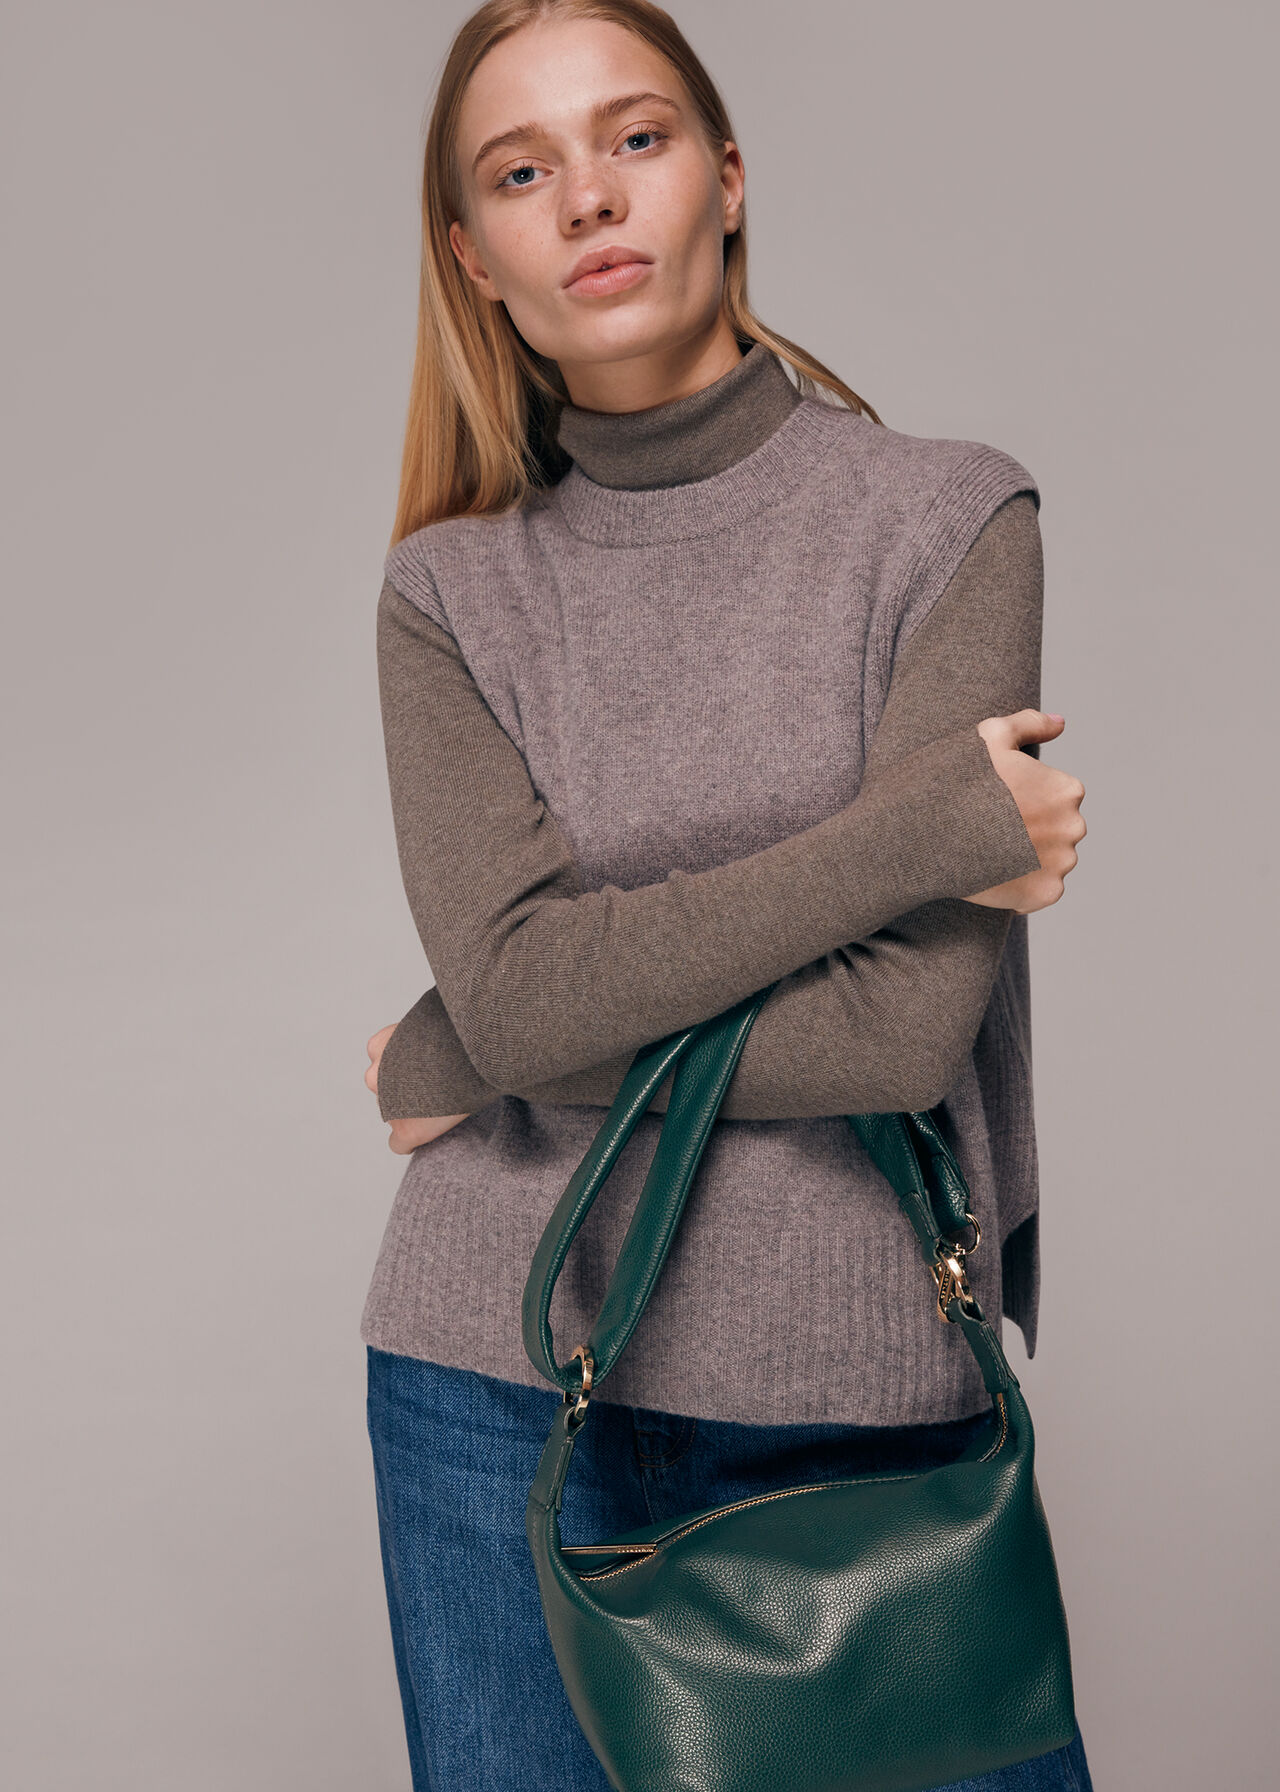 Nessie Slouchy Cube Bag